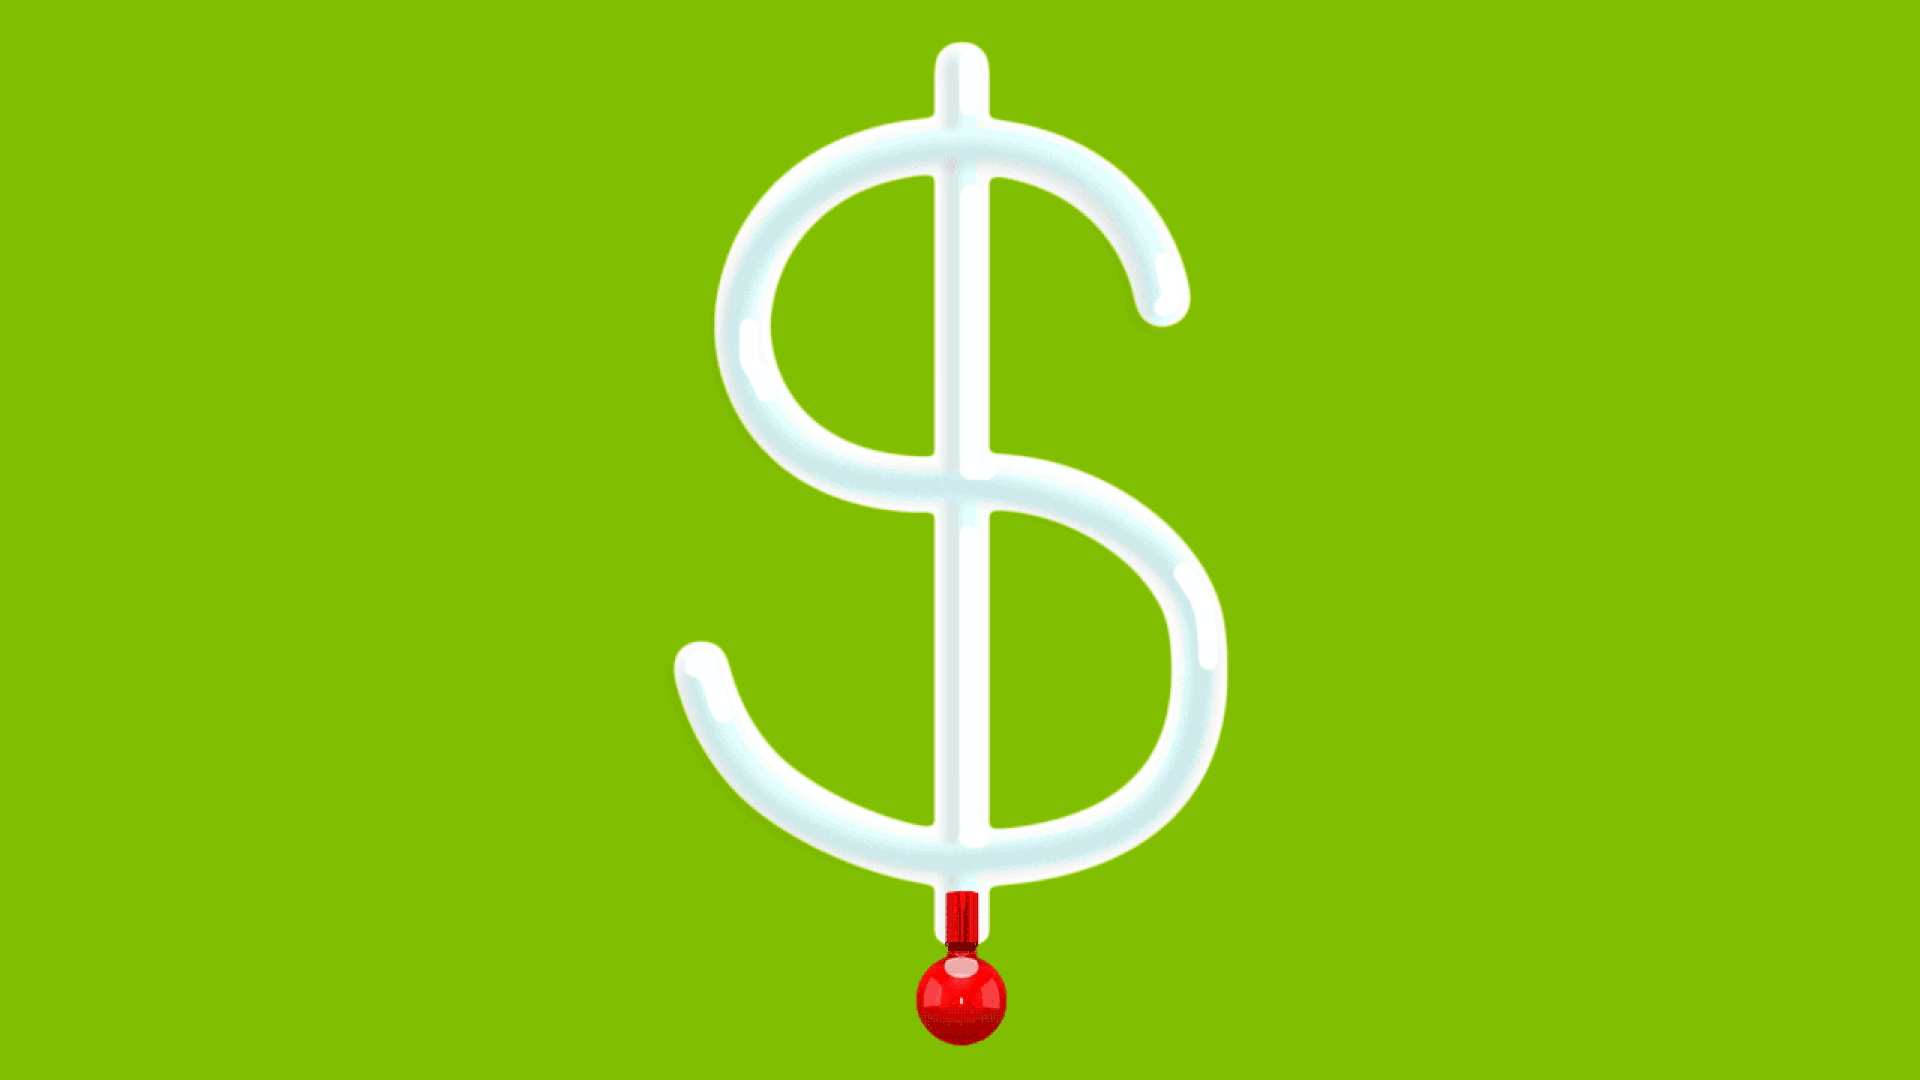 Animated illustration of a thermometer in the shape of a dollar bill sign, with temperature rising rapidly.